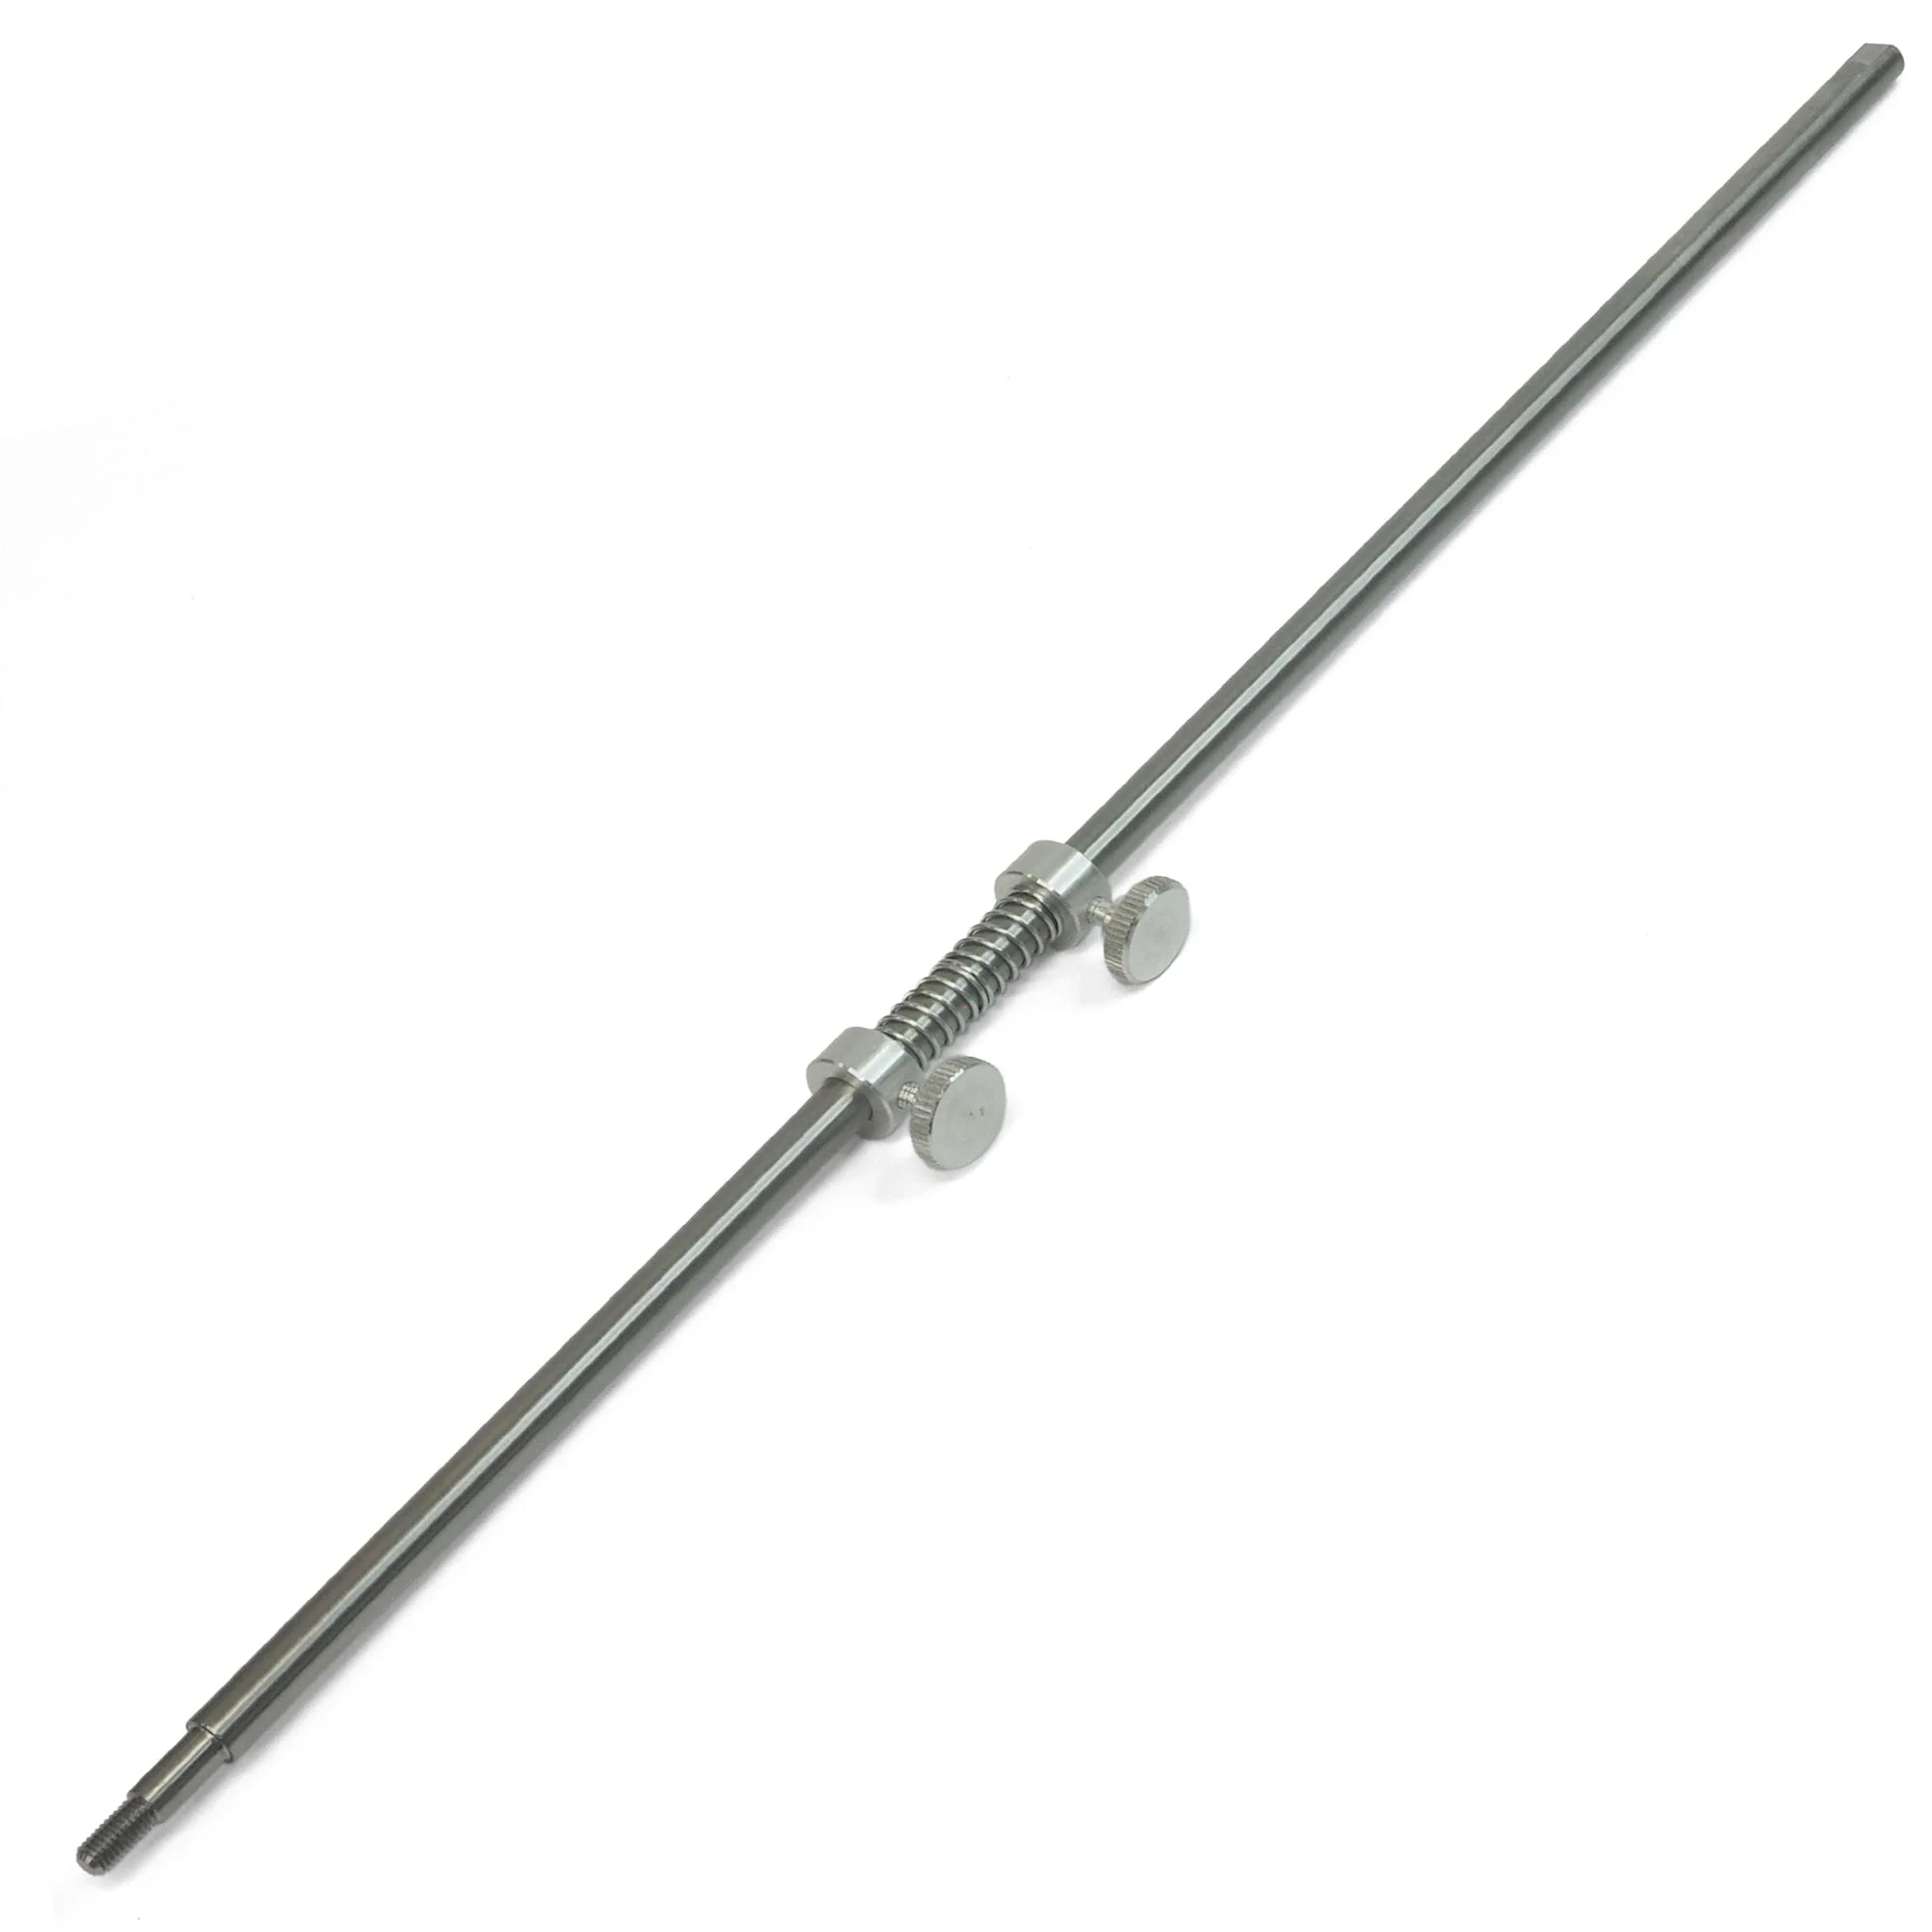 Can this titanium rod be used with Tsprof K02